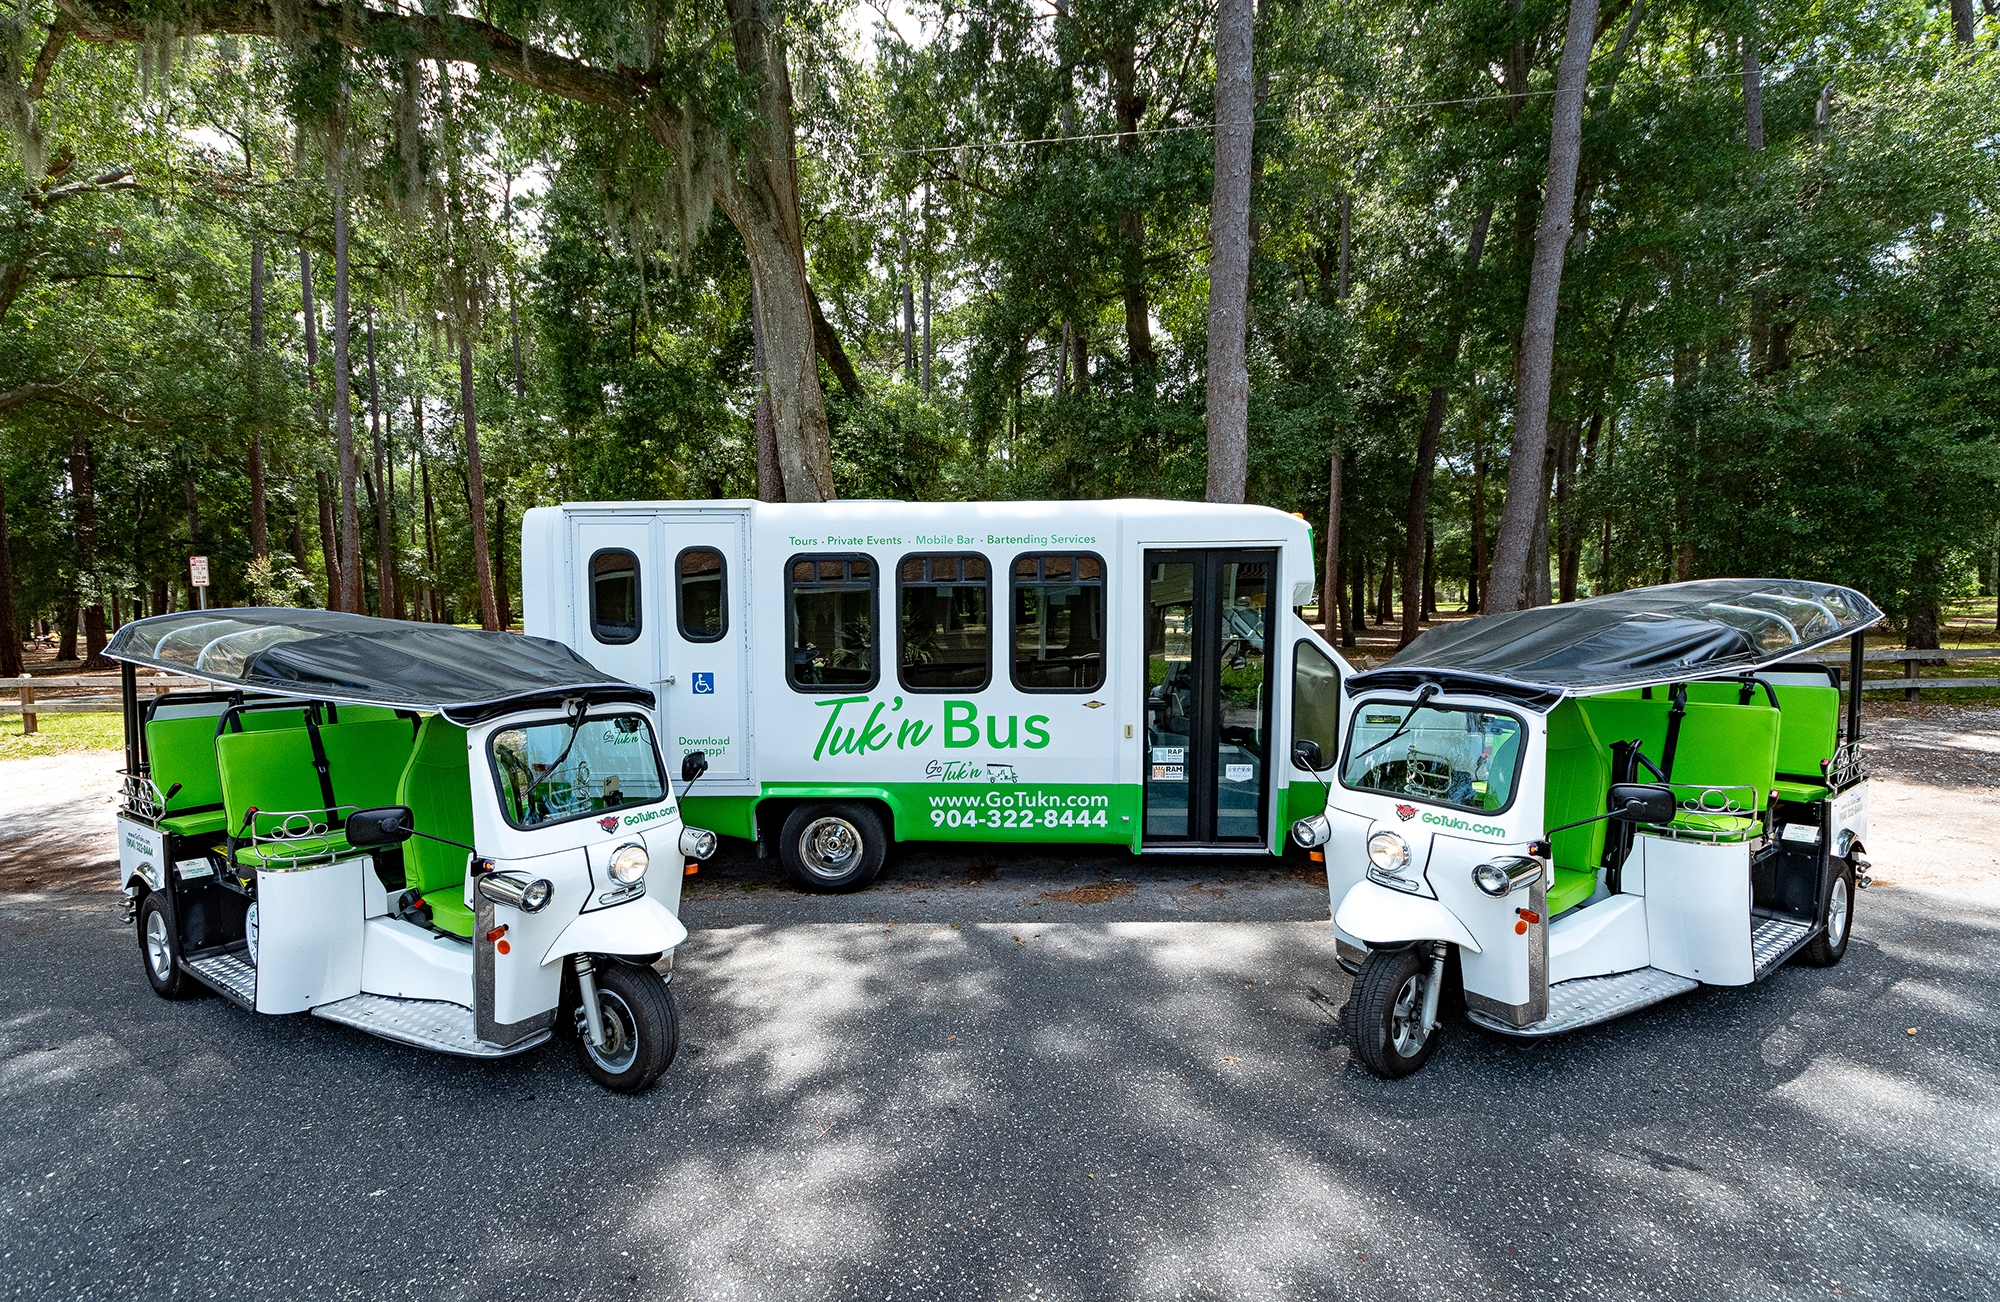 Go Tuk’n  will offer pay-to-ride service starting at $2 per trip beginning July 13.